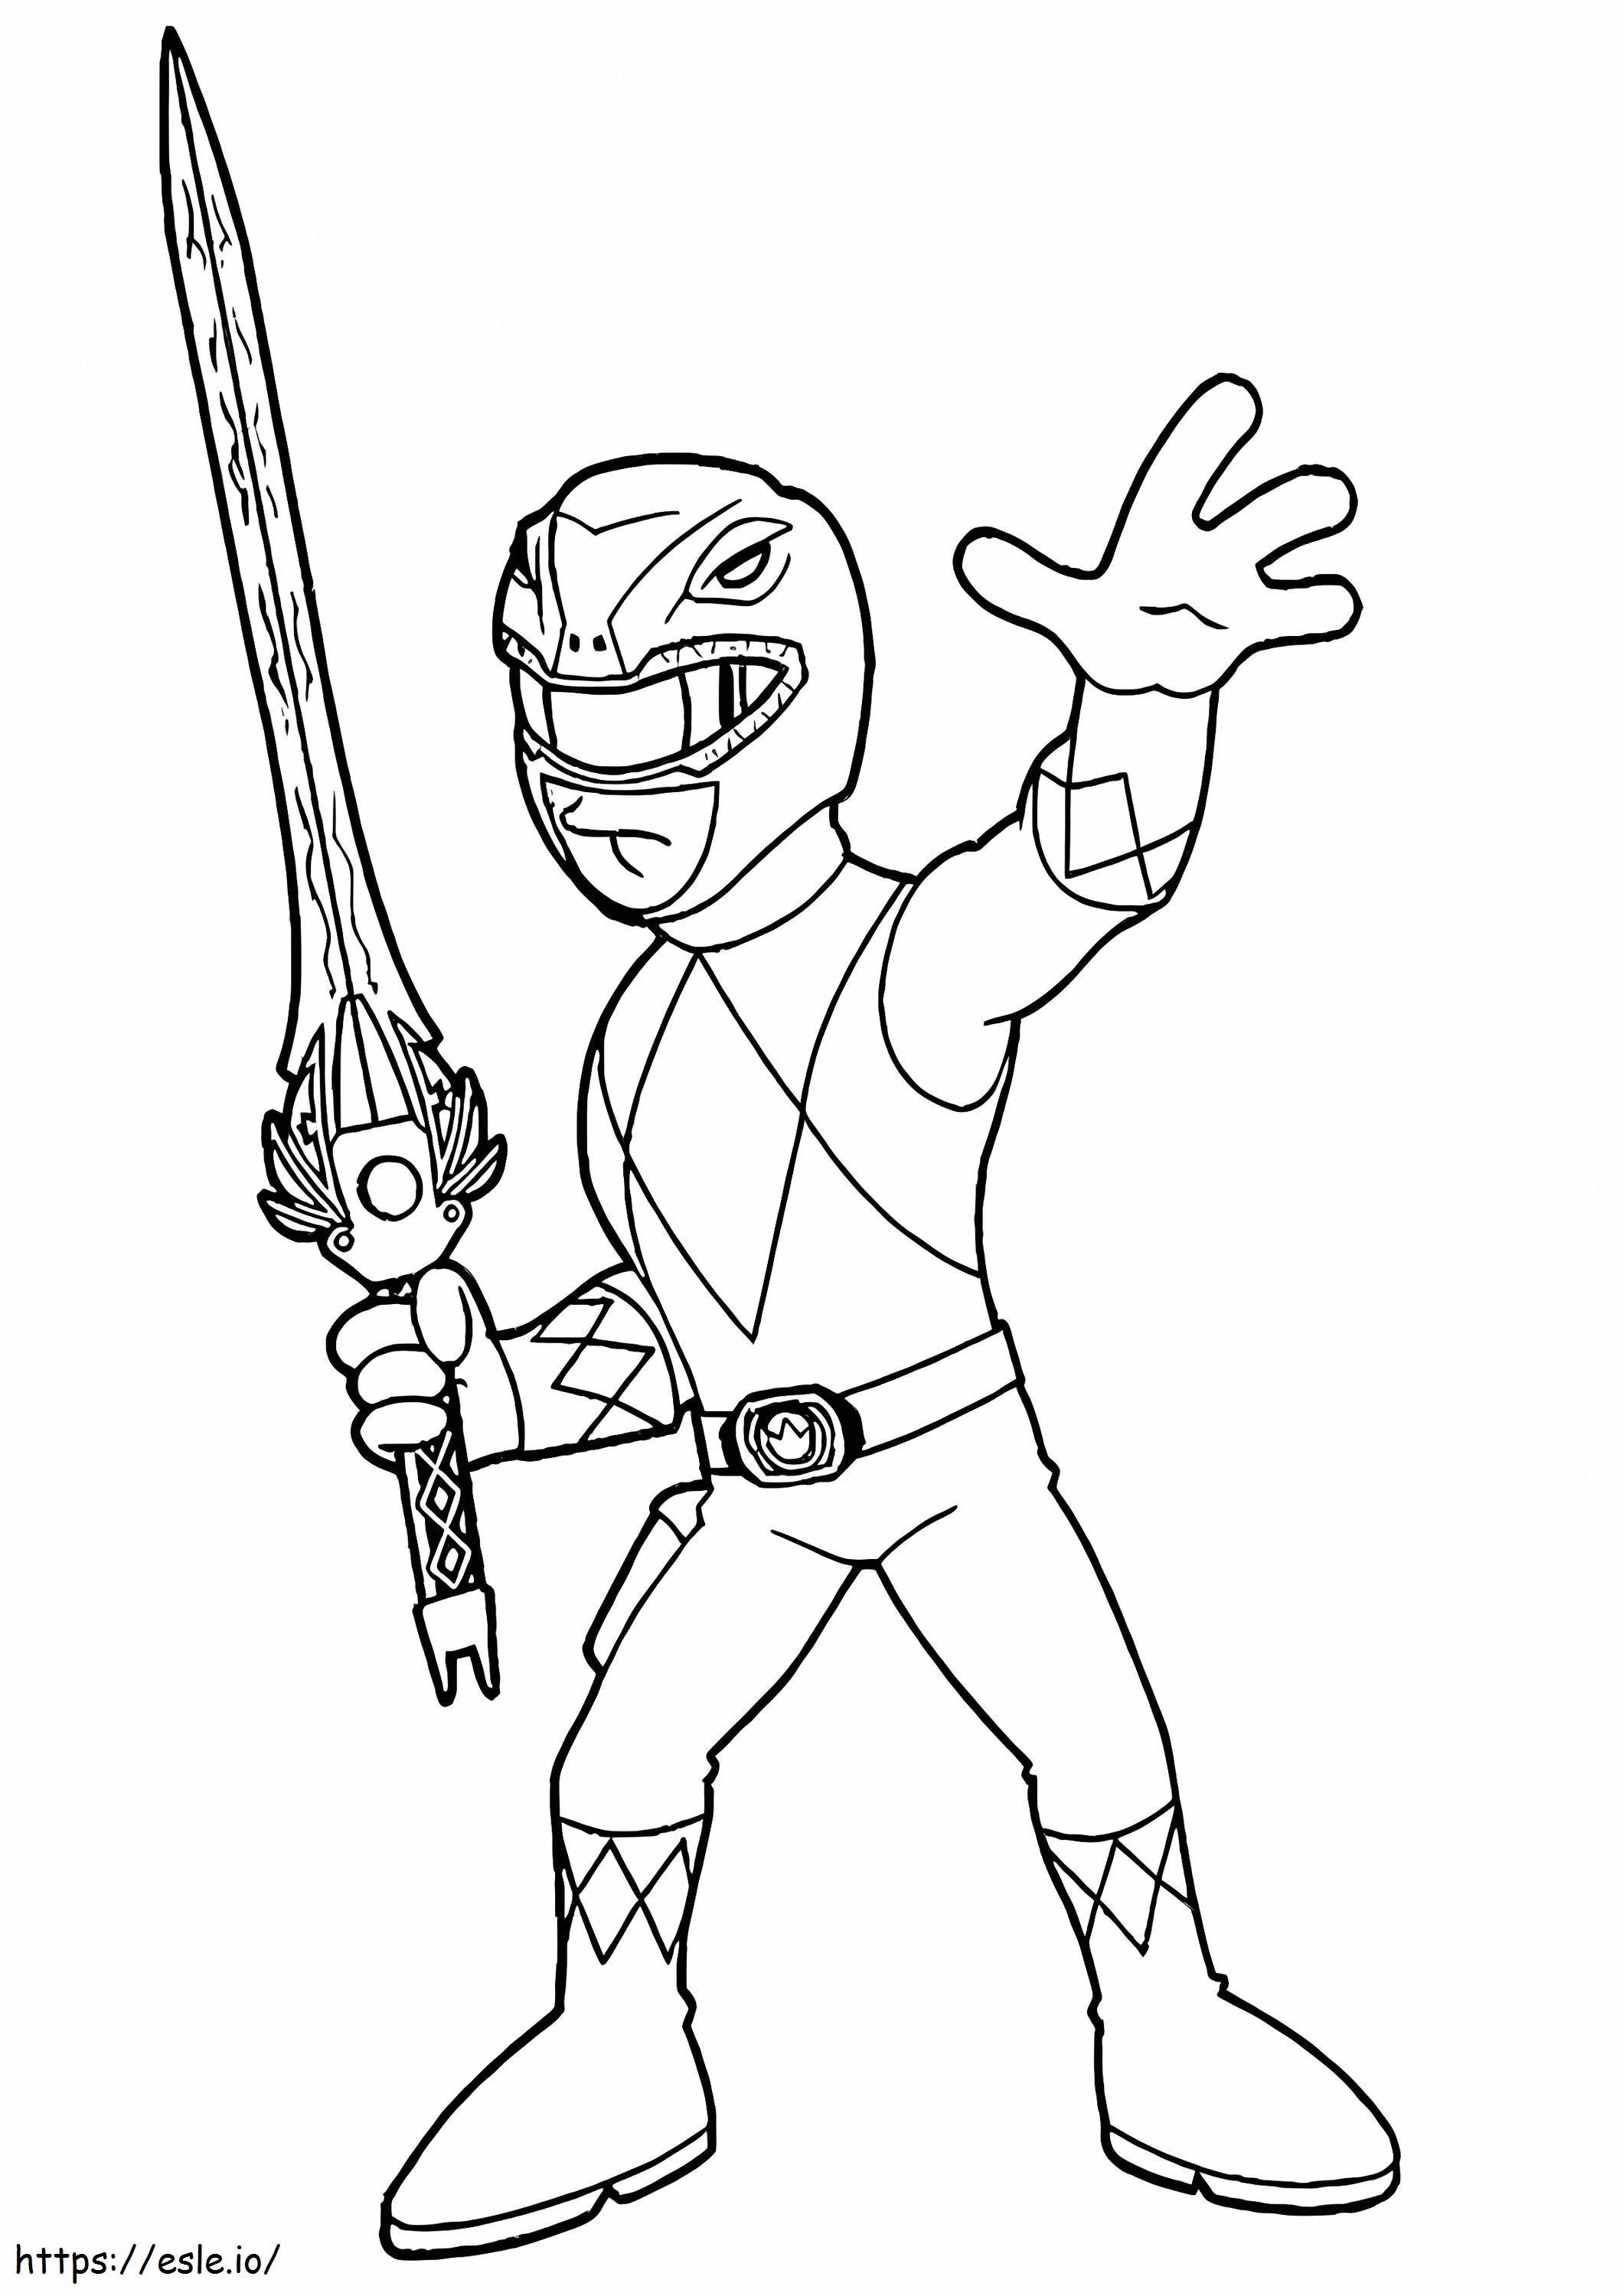 Power Ranger With Sword coloring page